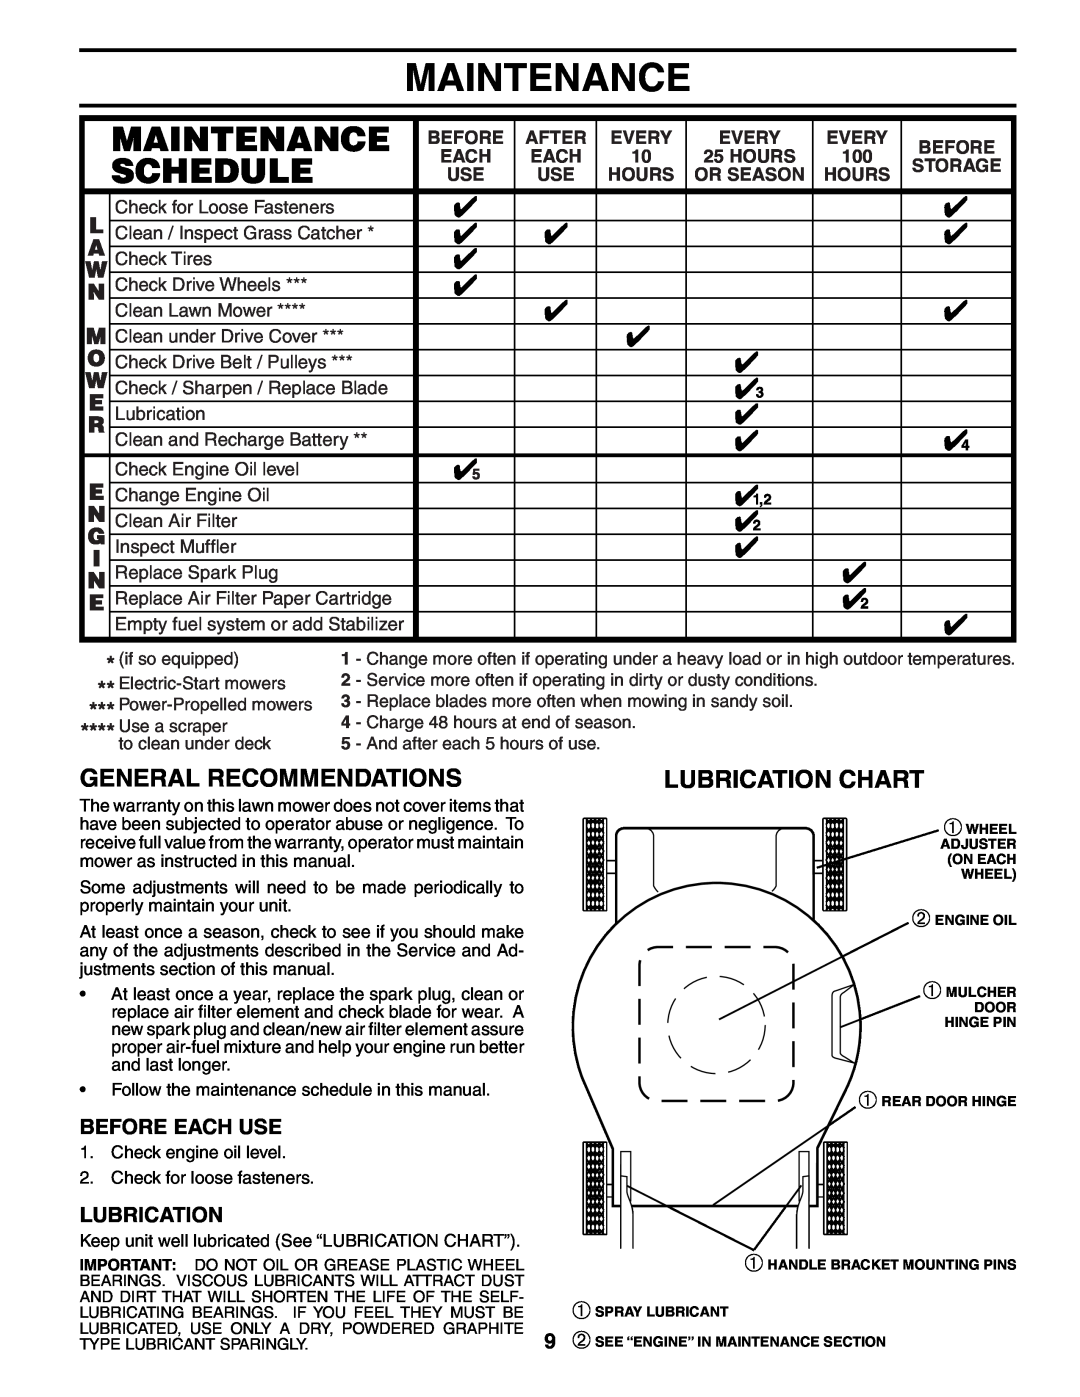 Husqvarna 917.375361 Maintenance, General Recommendations, Lubrication Chart, Before Each Use, After, Every, Storage 